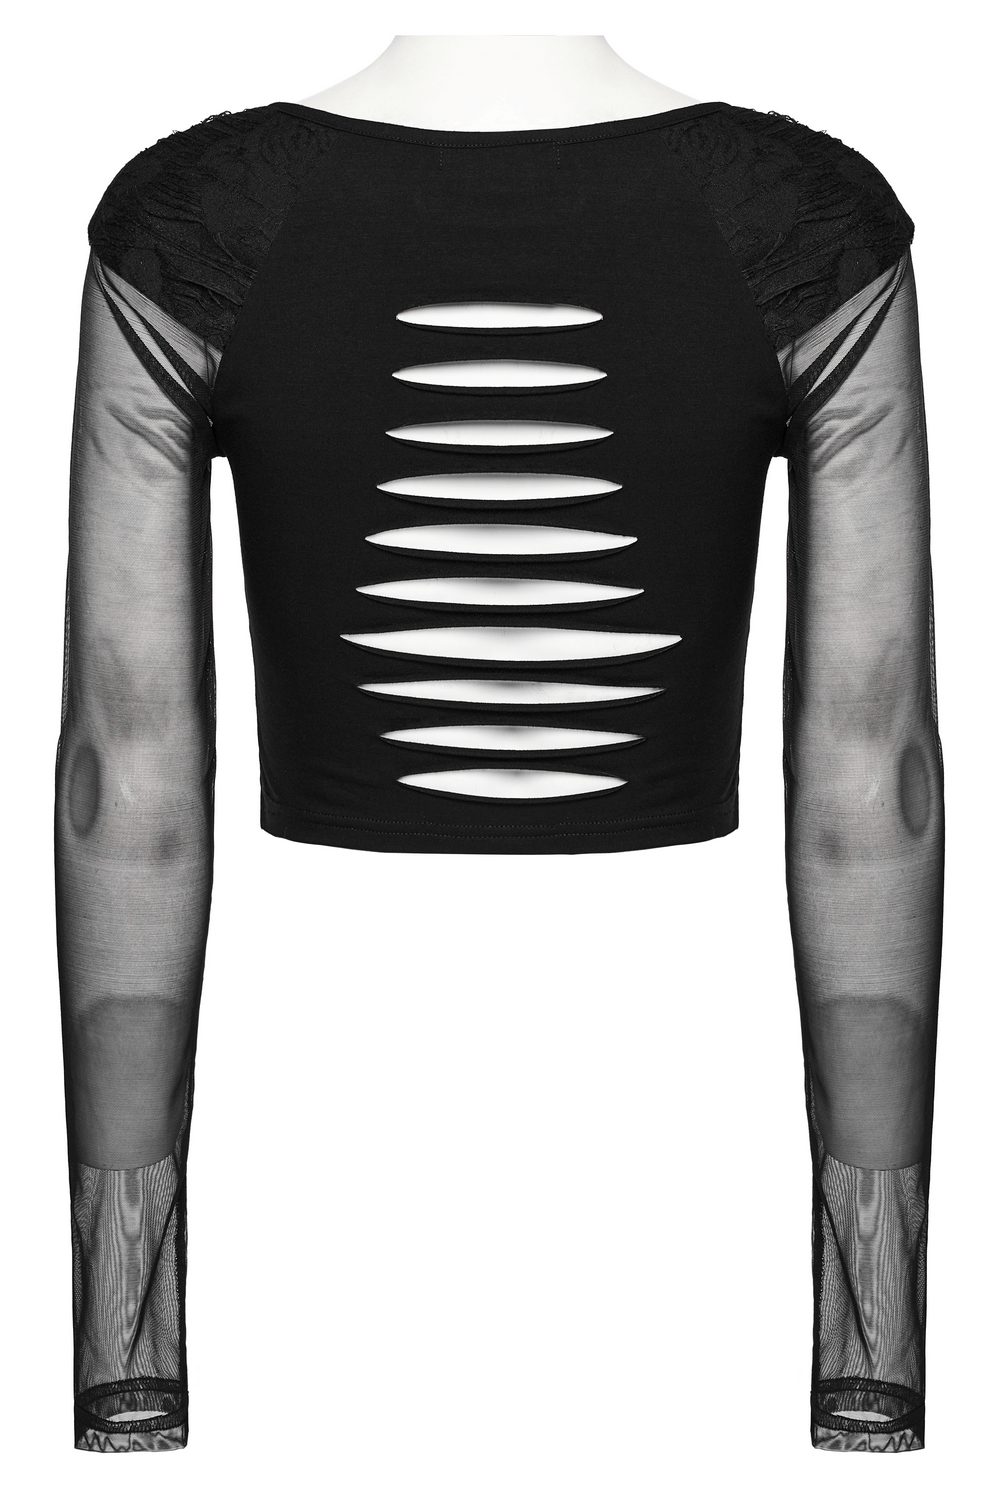 Black Crop Top with Long Mesh Sleeves and Skull Buckle